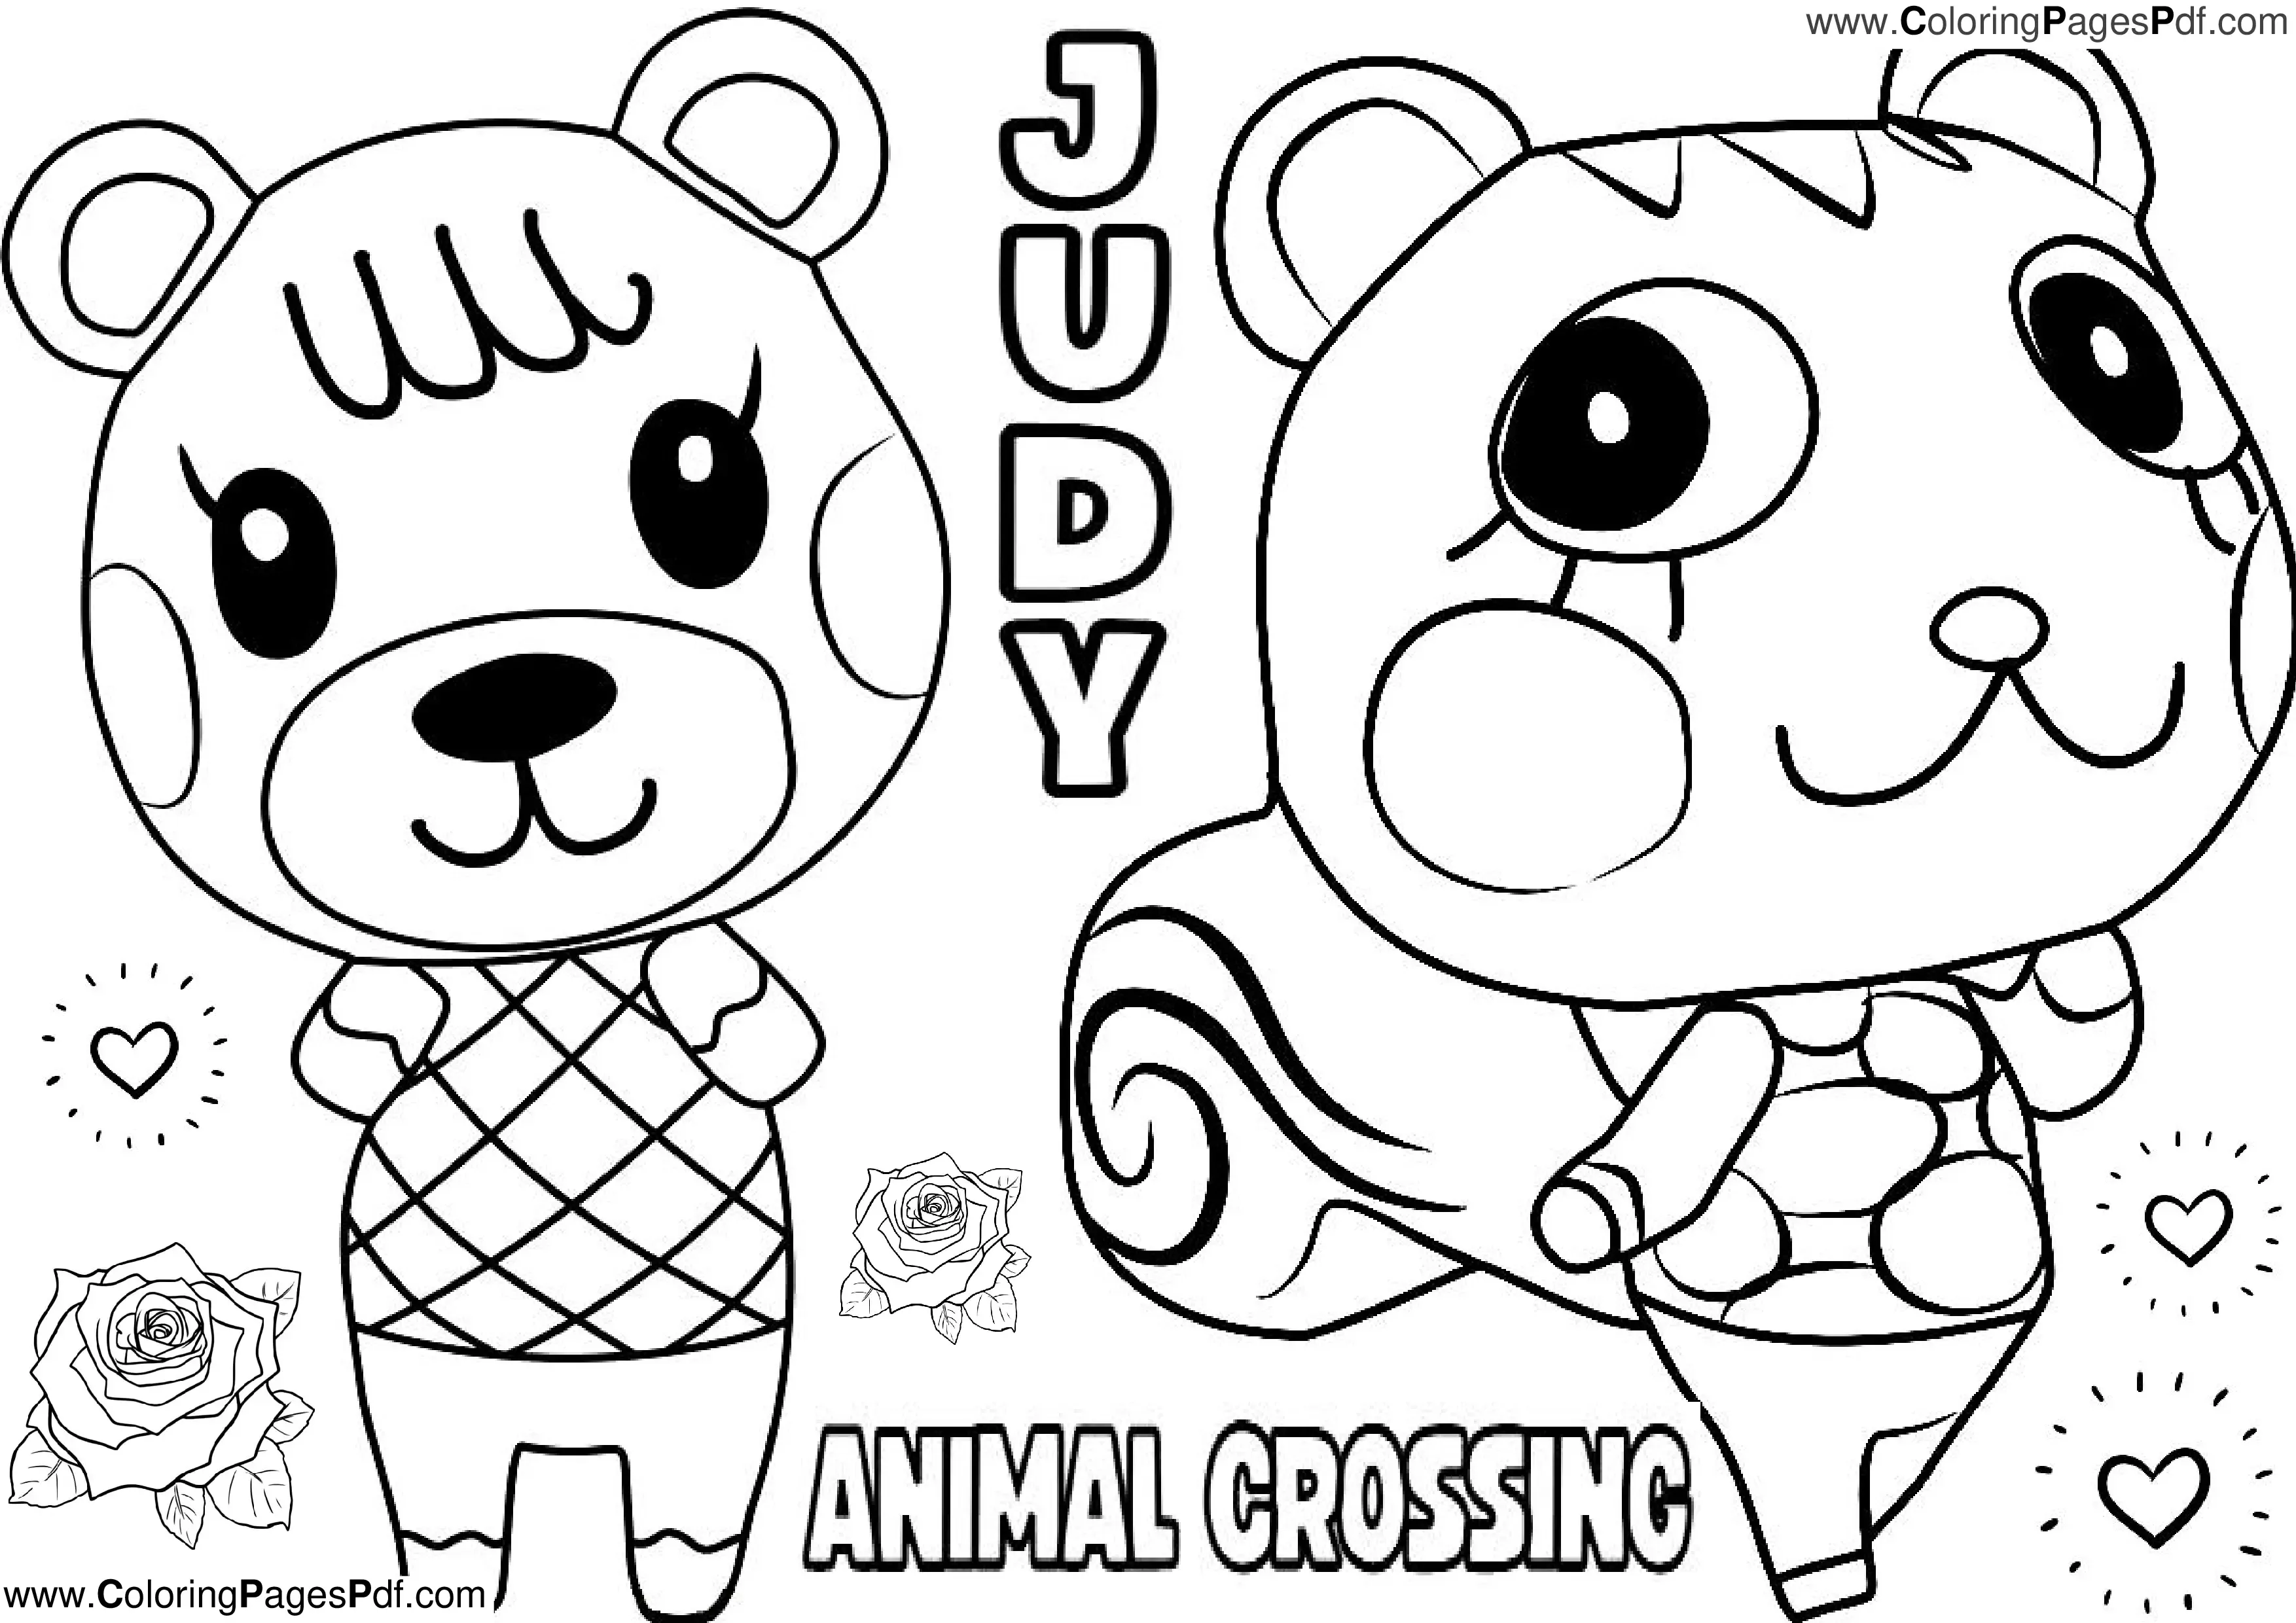 Judy animal crossing coloring pages